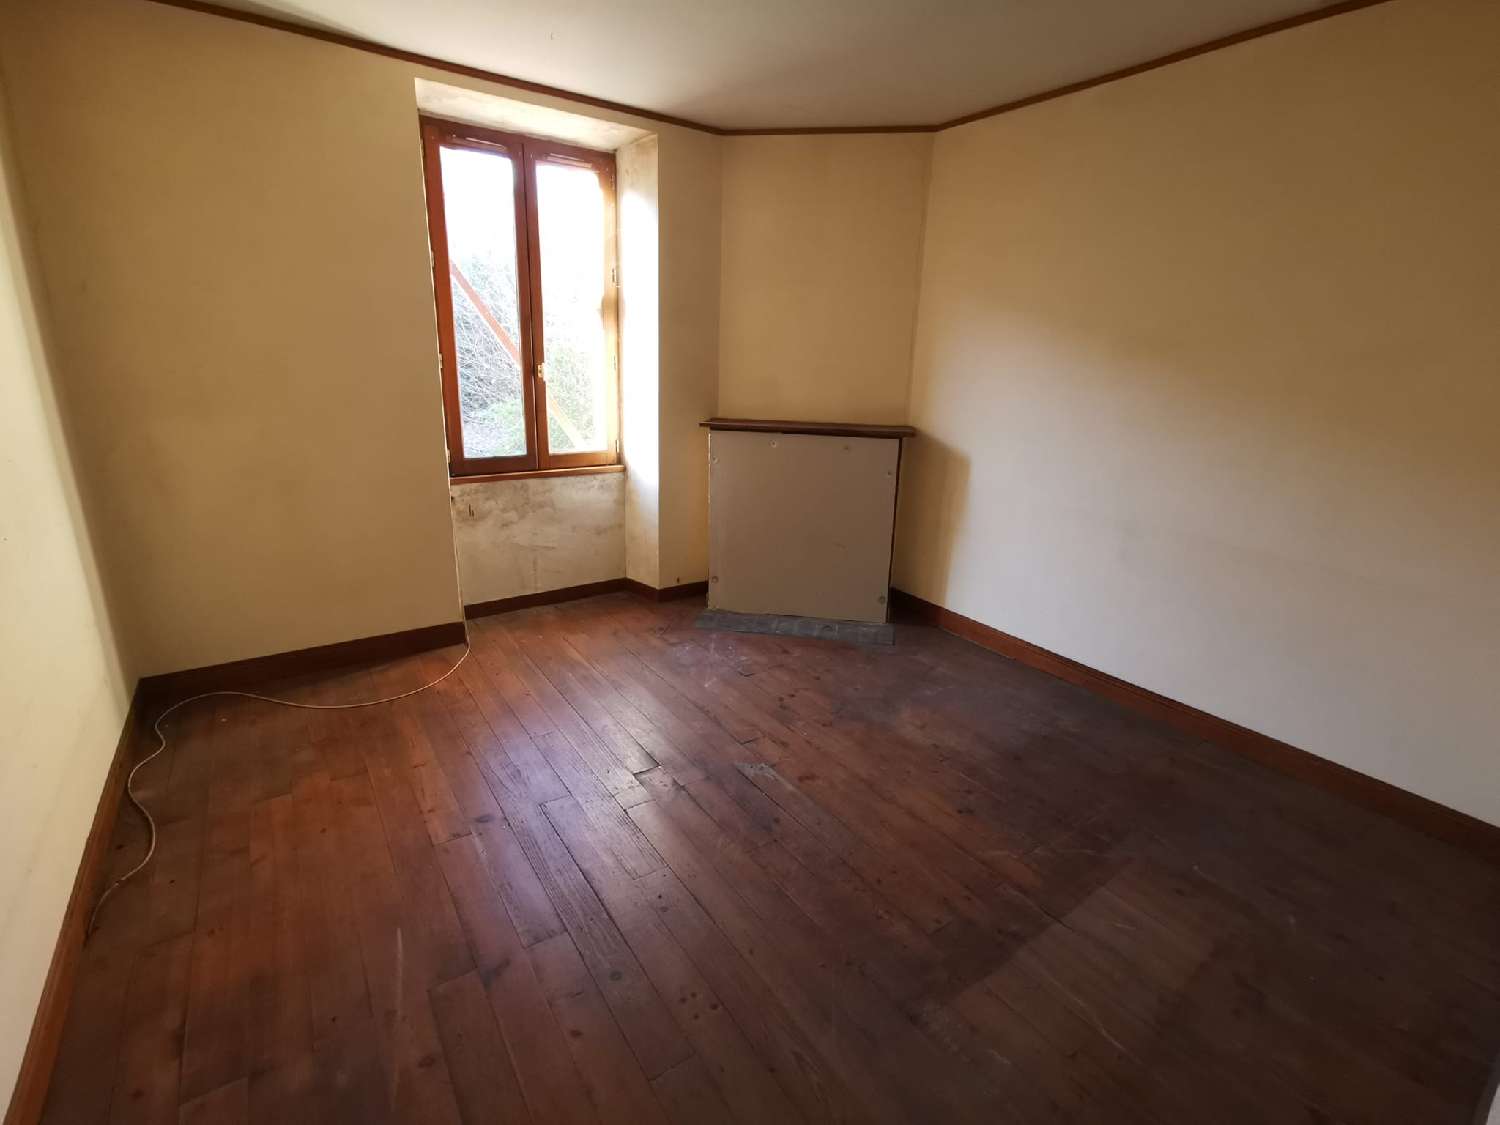  for sale house Bourganeuf Creuse 5